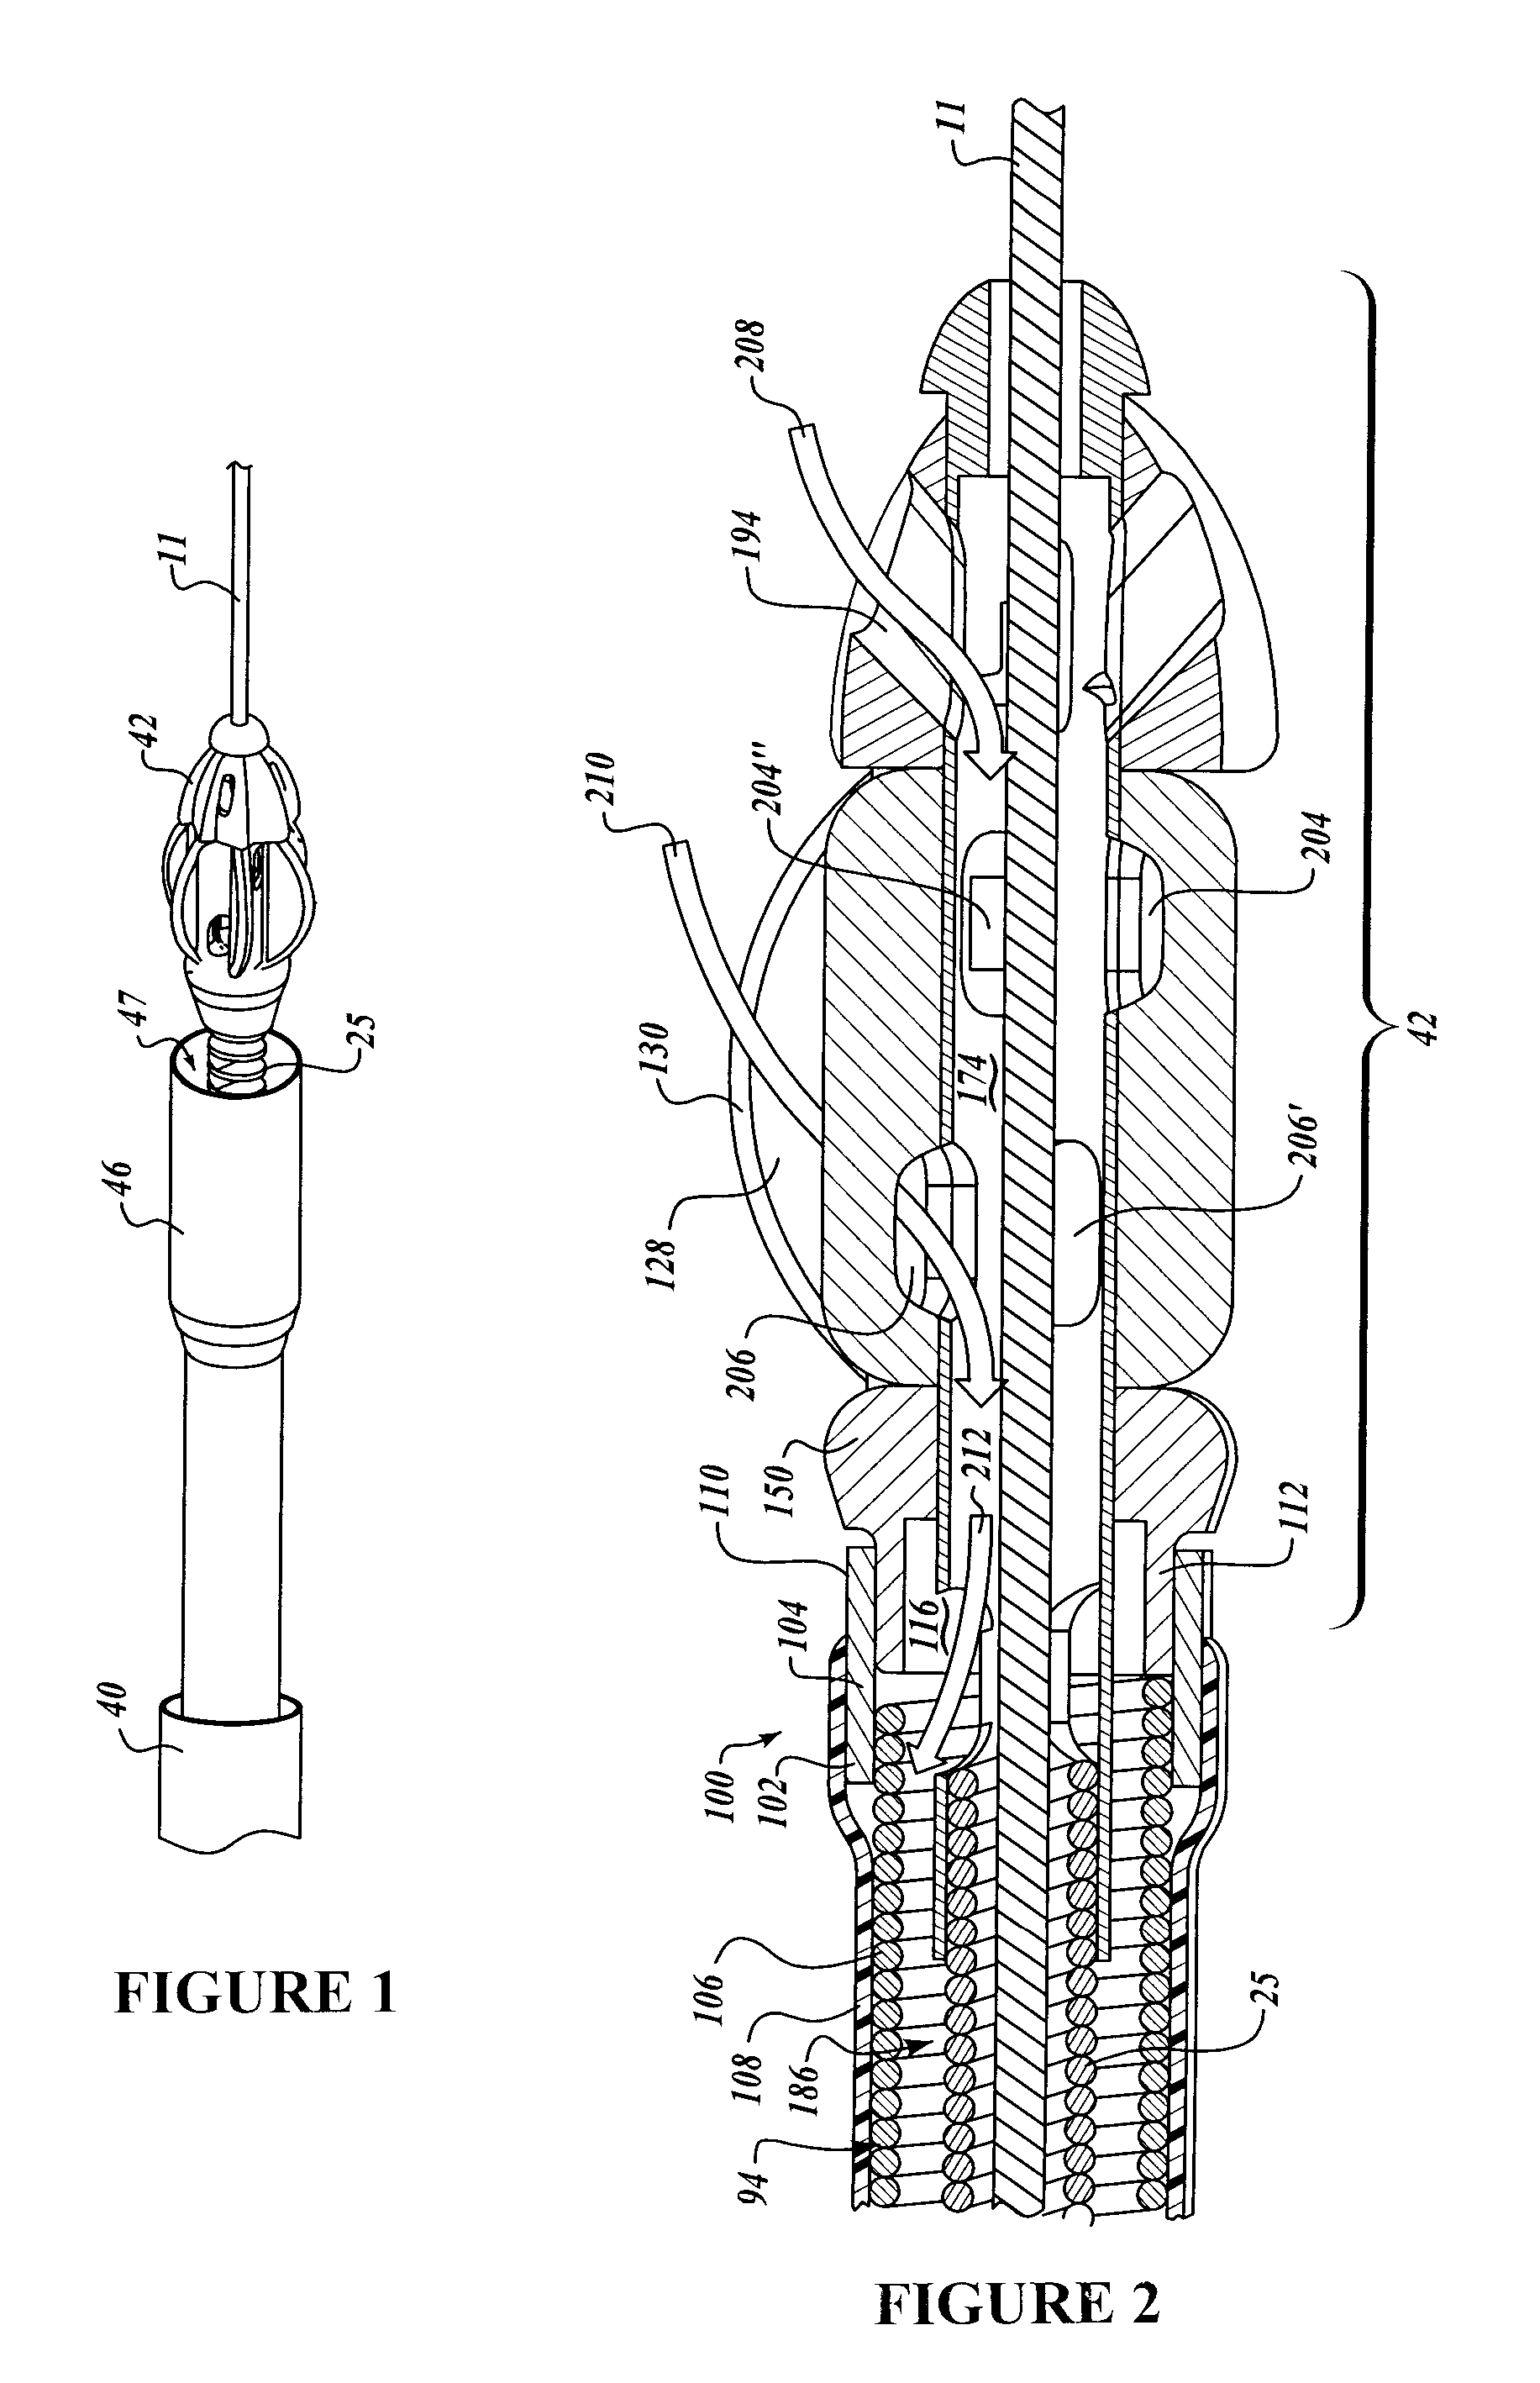 Intralumenal material removal using a cutting device for differential cutting